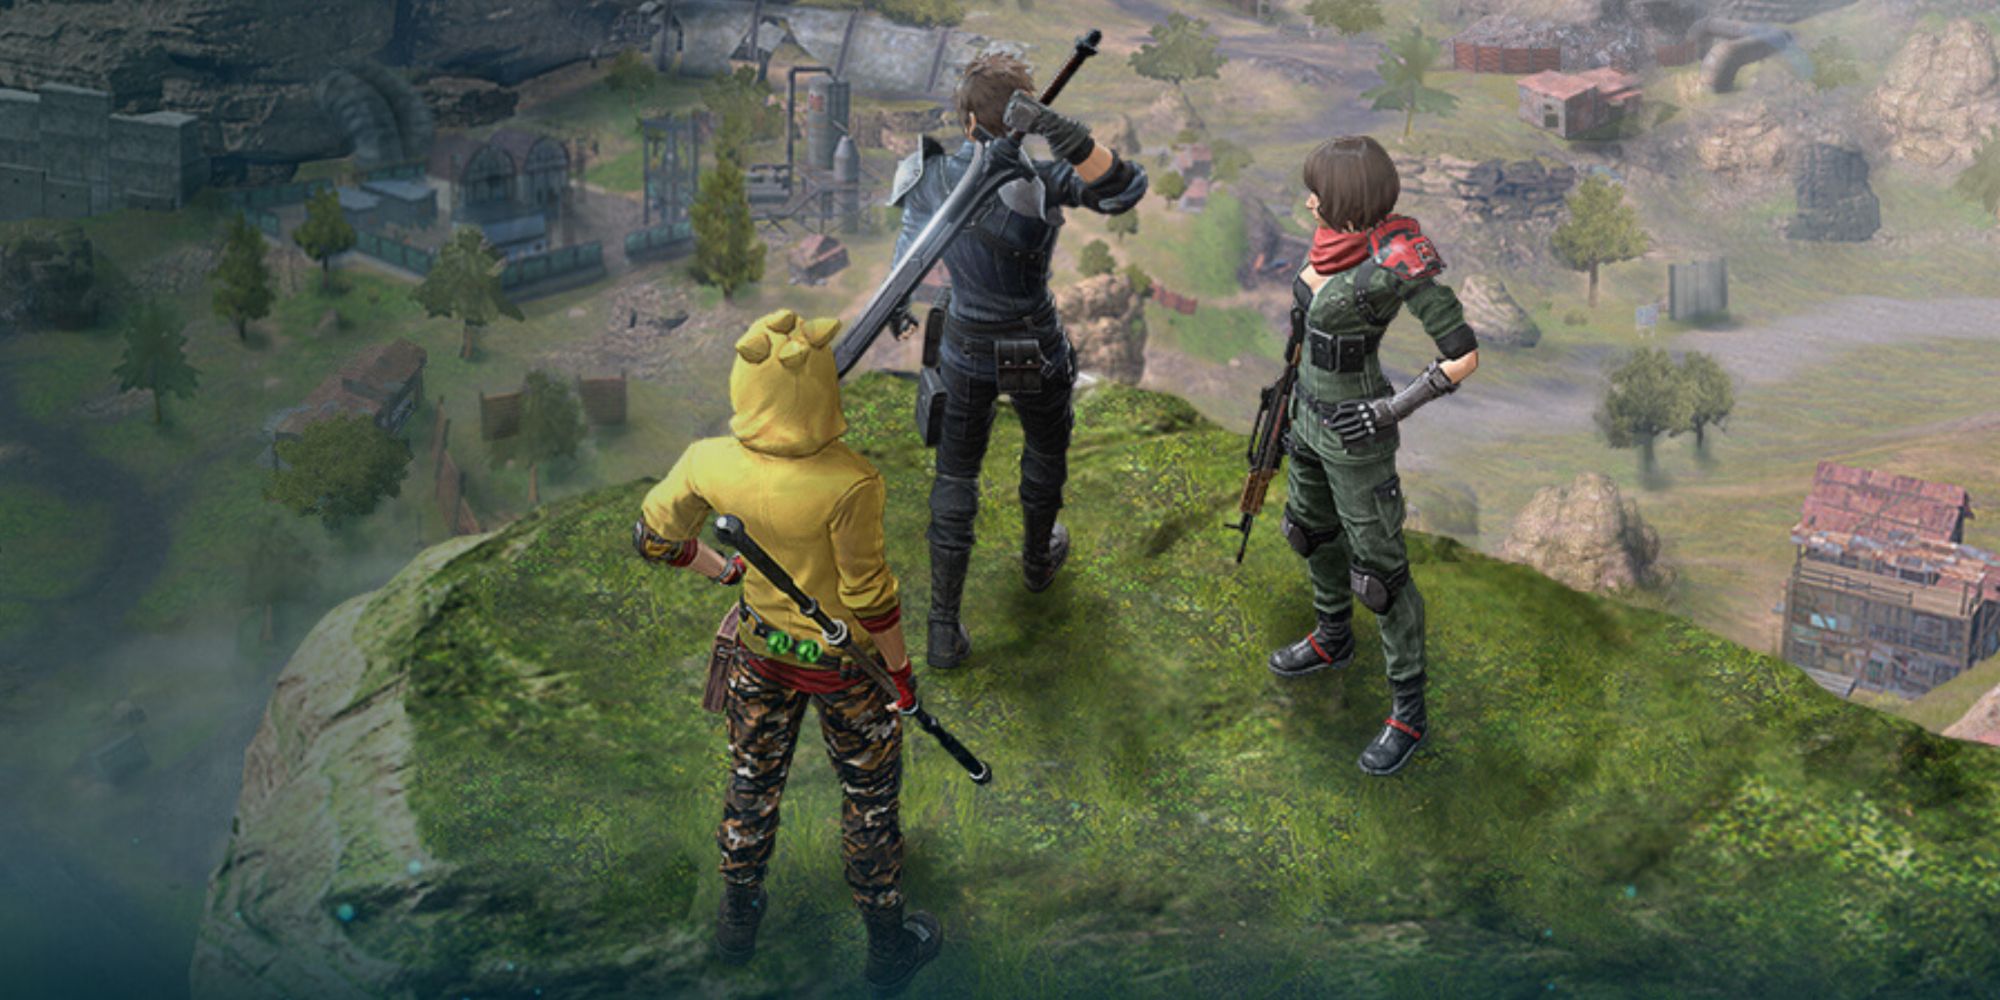 Final Fantasy VII The First Soldier Battle Royale - Image of three players stood atop a cliff looking over the battlefield.